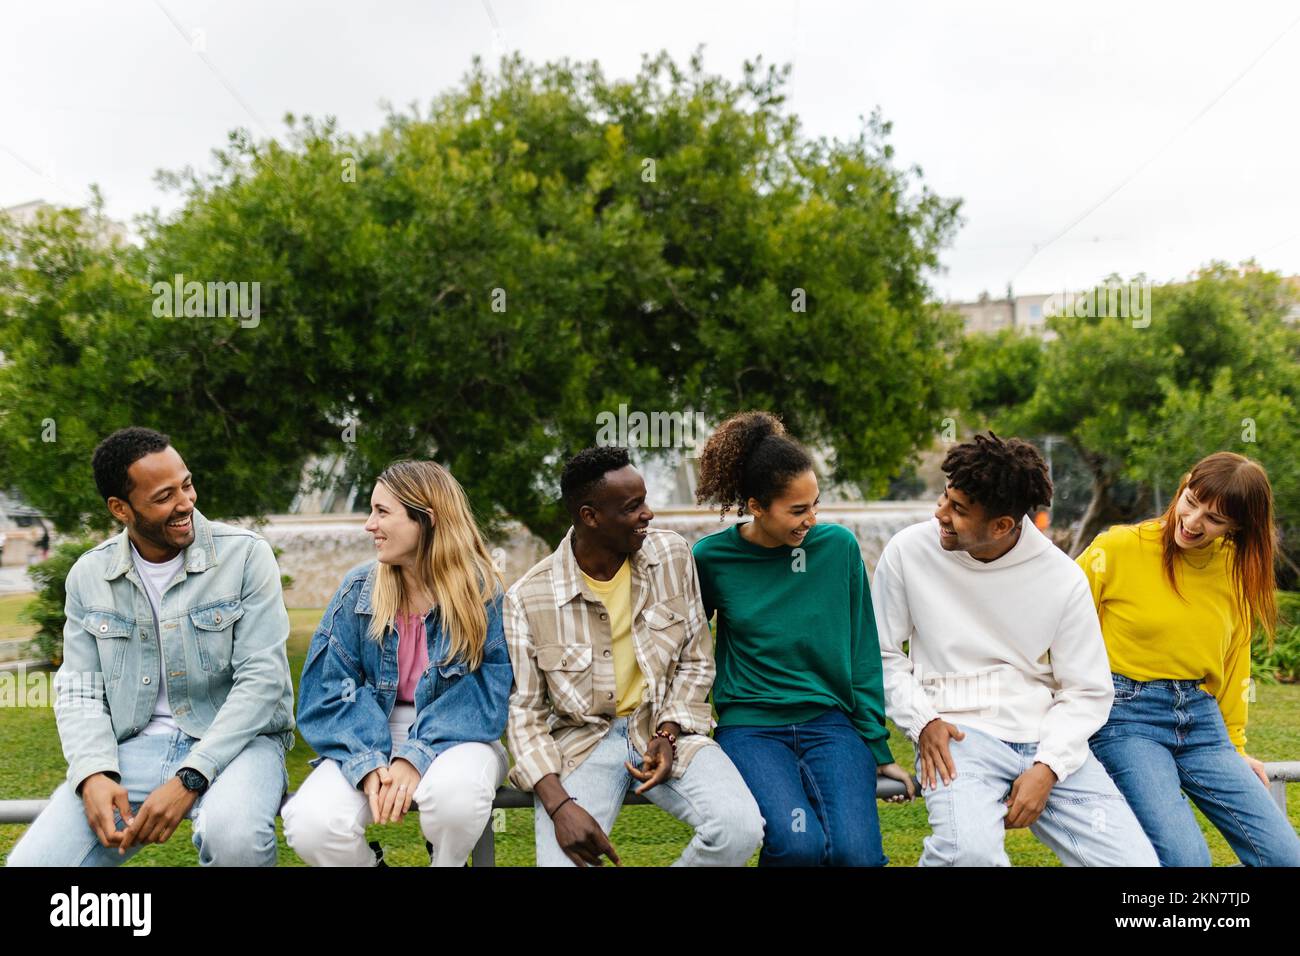 Multi-ethnic group of young friends having fun outdoors Stock Photo